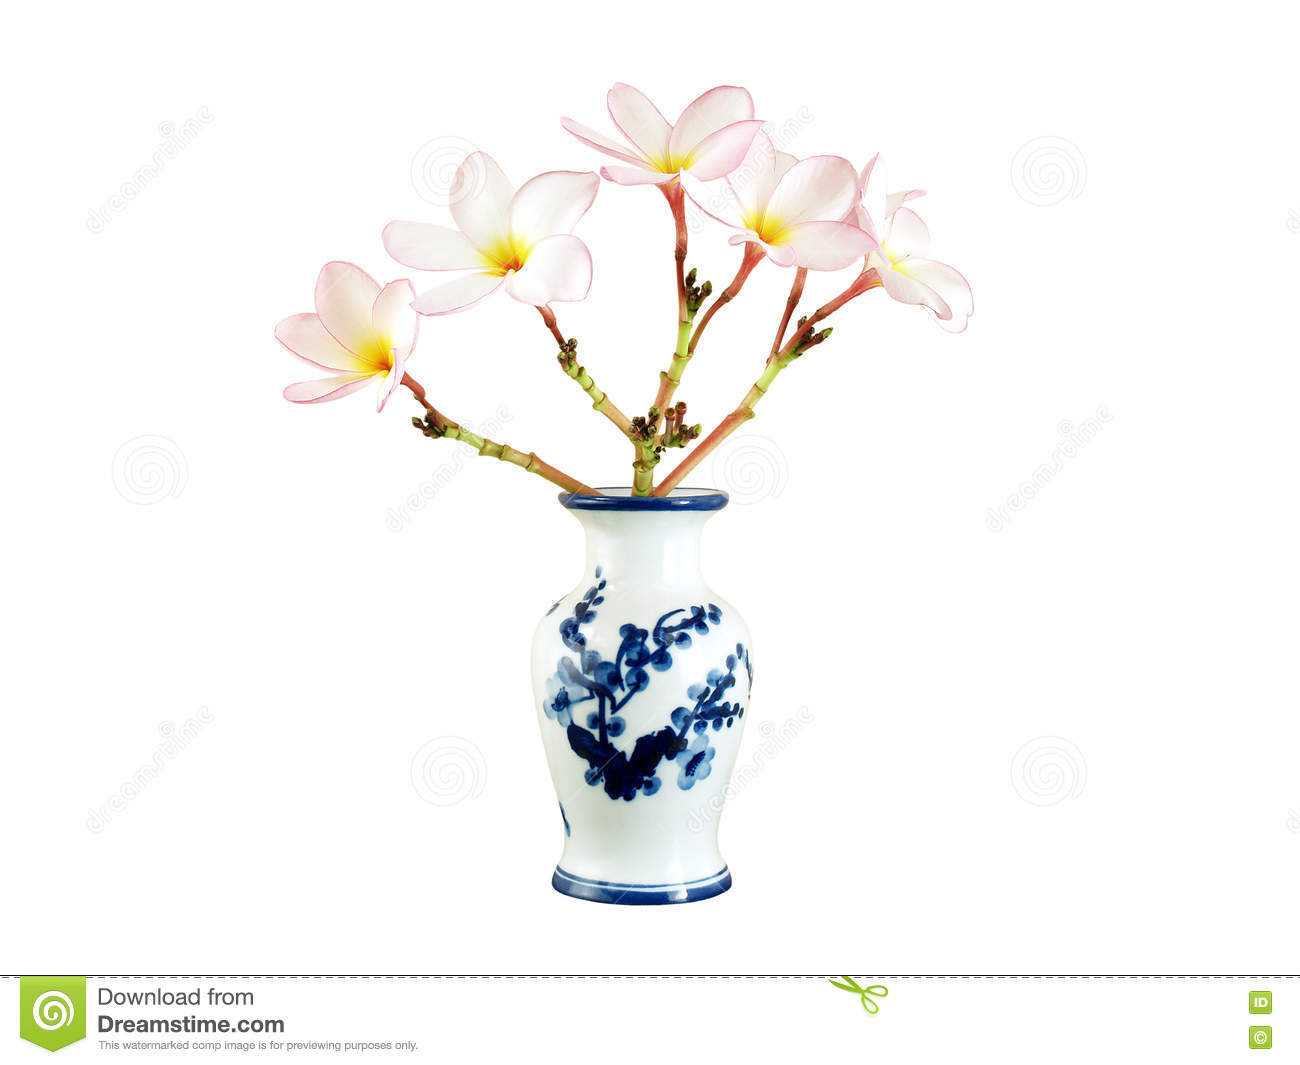 19 Stylish What is A Rose Bowl Vase 2024 free download what is a rose bowl vase of beautiful bouquet light pink plumeria or frangipani in white chinese pertaining to beautiful bouquet light pink plumeria or frangipani in white chinese vase with 